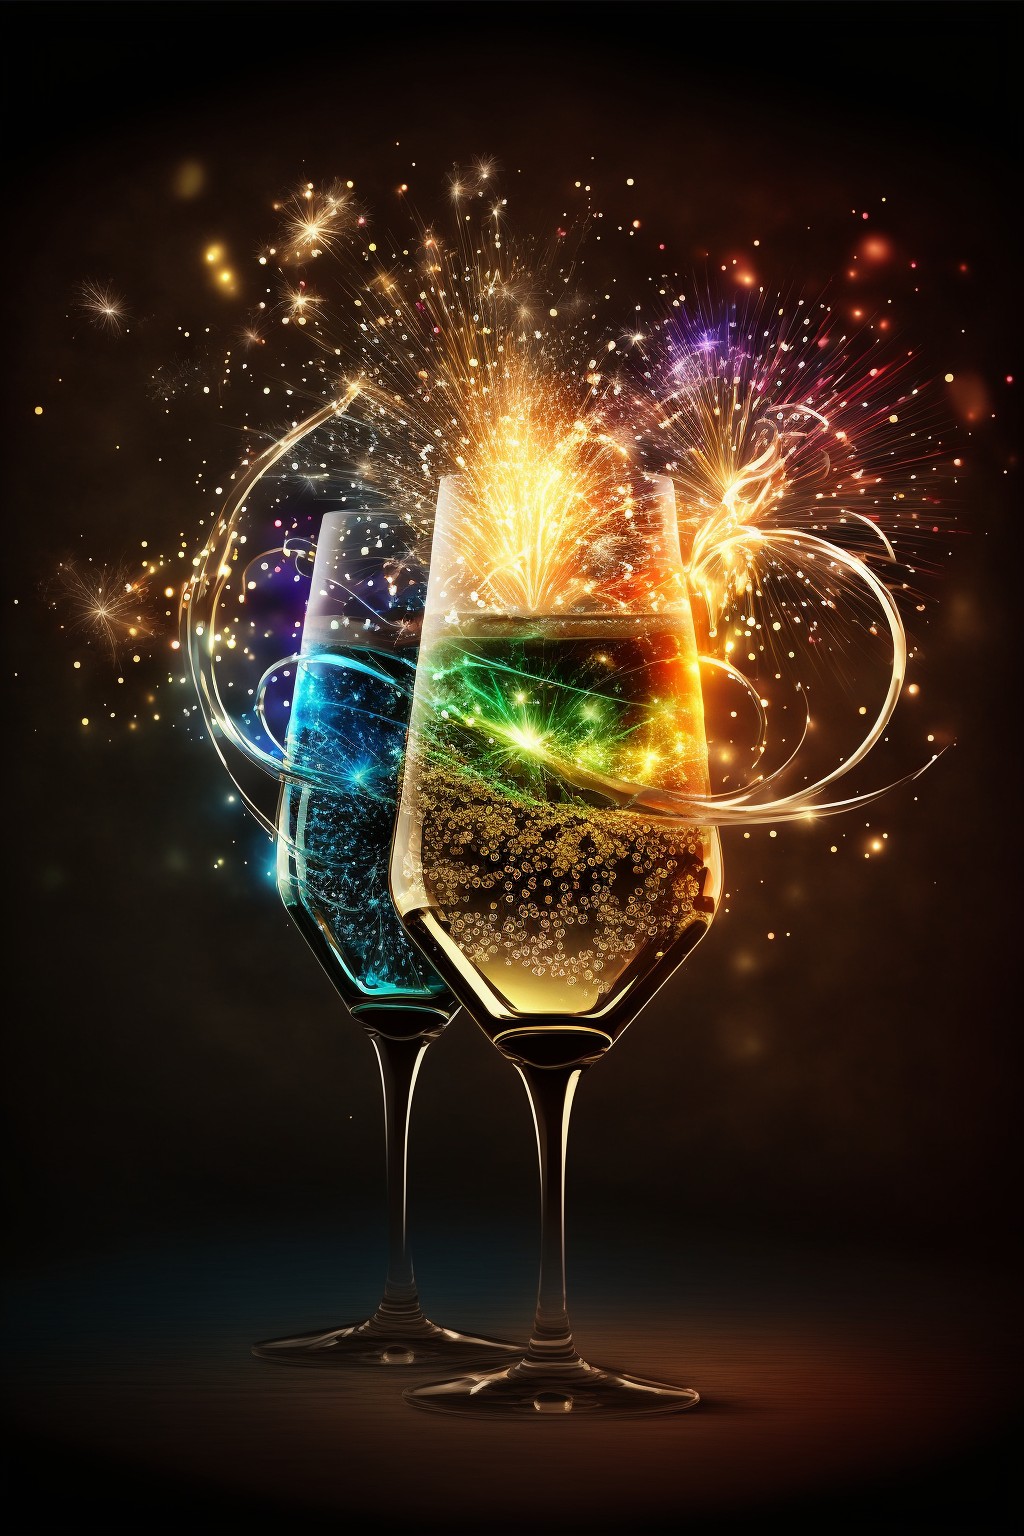 Wine glasses in fireworks blooming, celebrating New Year's Eve